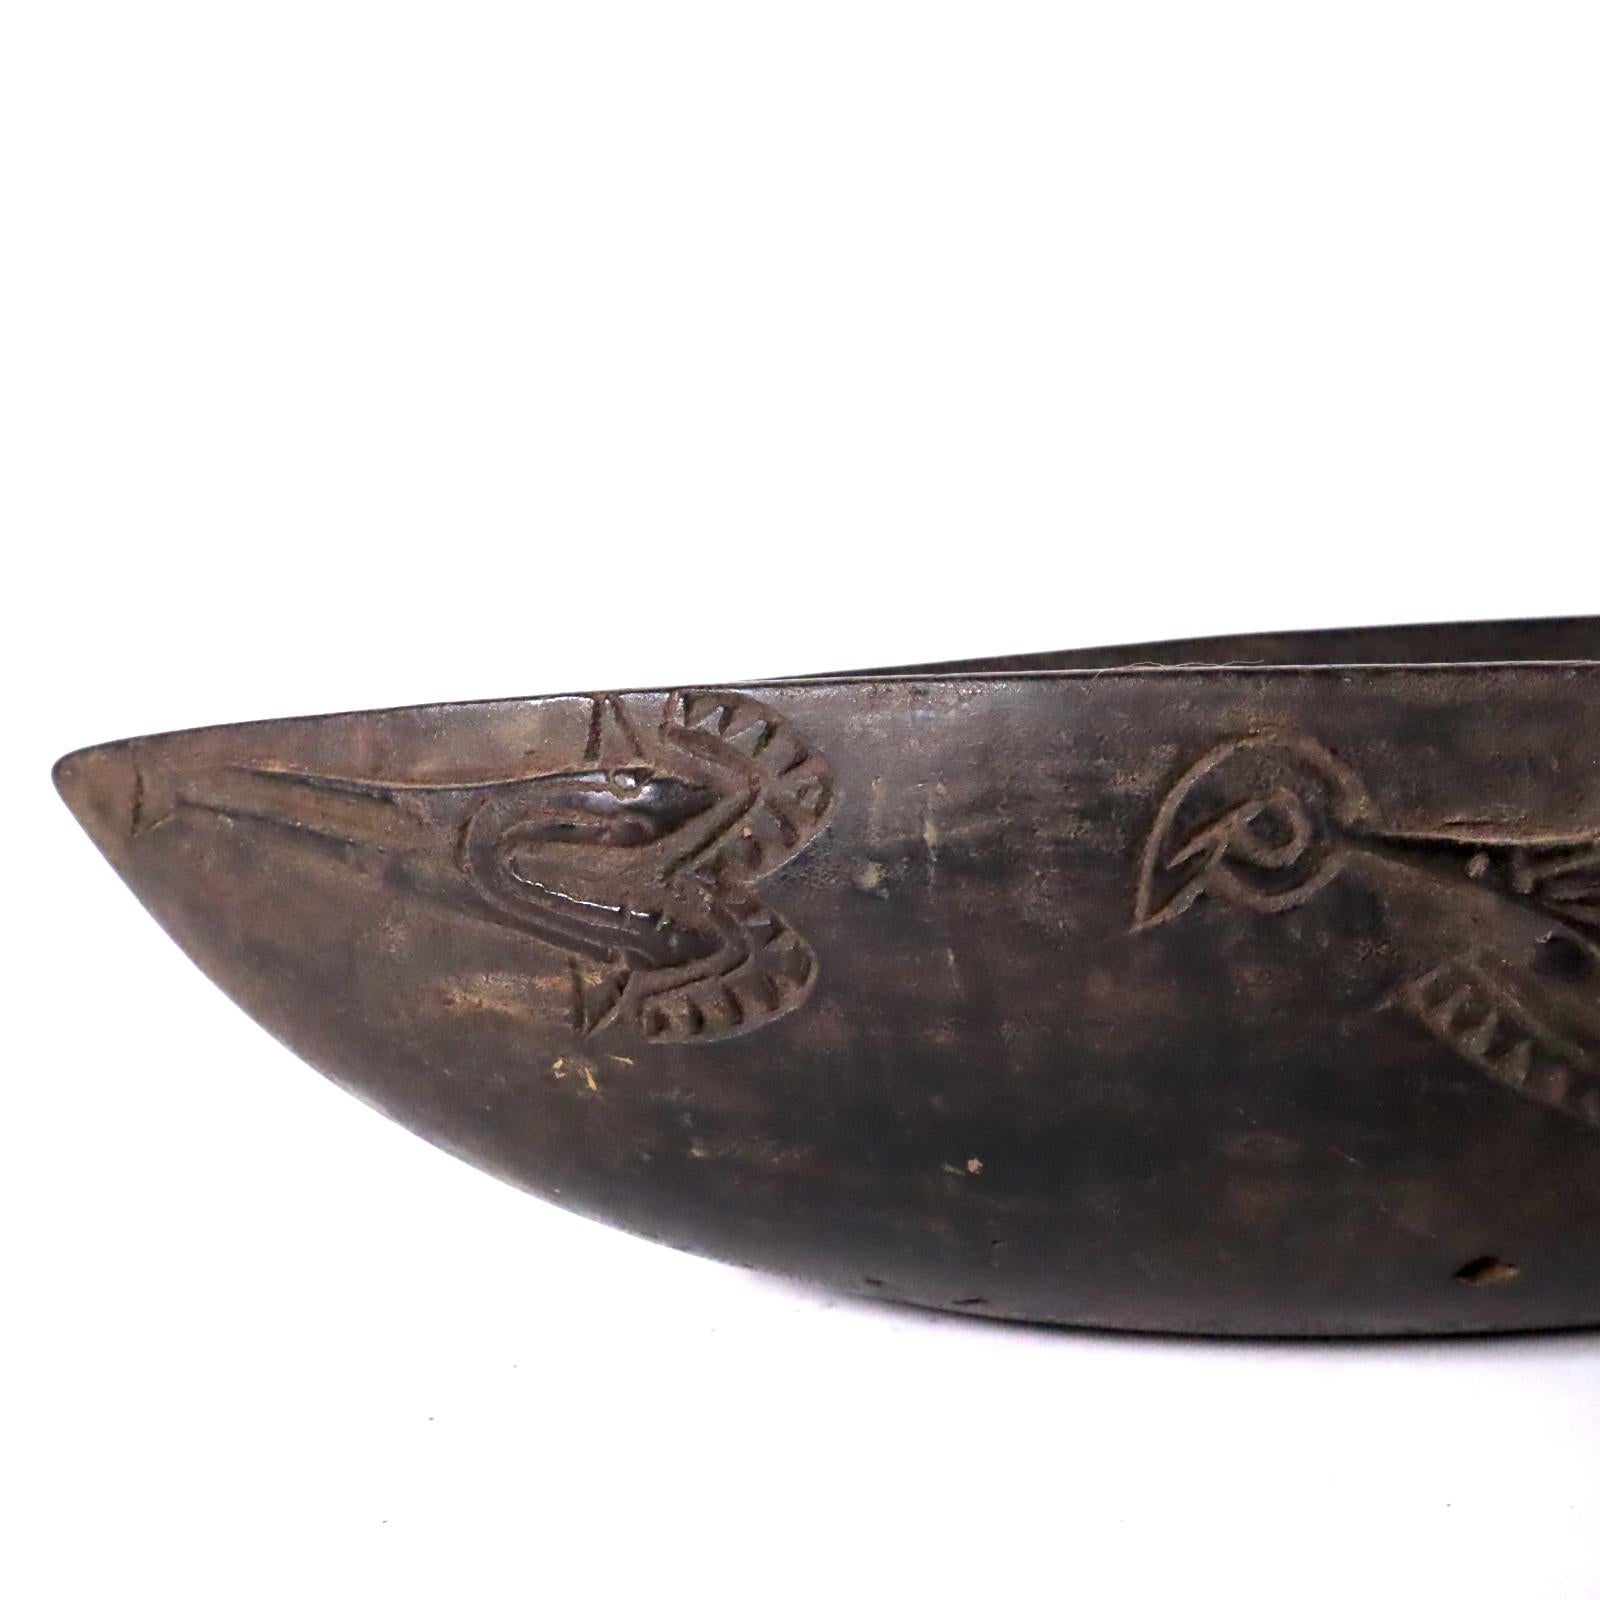 Store closing March 31 Last chance clearance sale.  Feast bowl, carved wood with black patina. From the Massim region off the East Coast of Papua New Guinea. Probably created in the early to mid-20th century for use as a serving bowl at